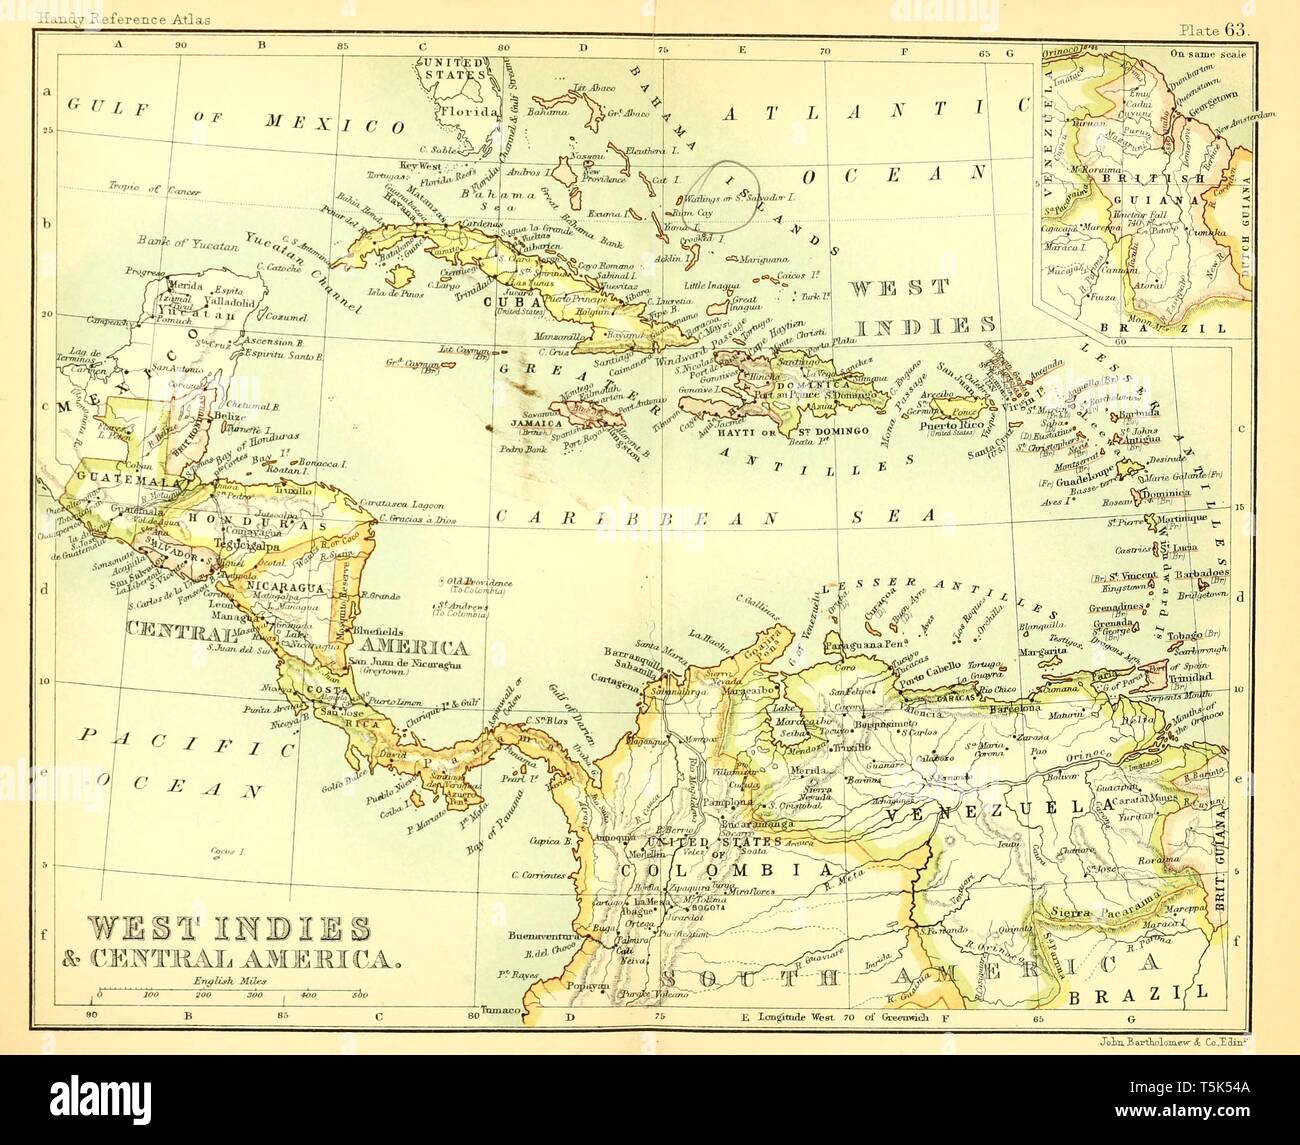 Beautiful vintage hand drawn map illustrations of West Indies from old book. Can be used as poster or decorative element for interior design. Stock Photo